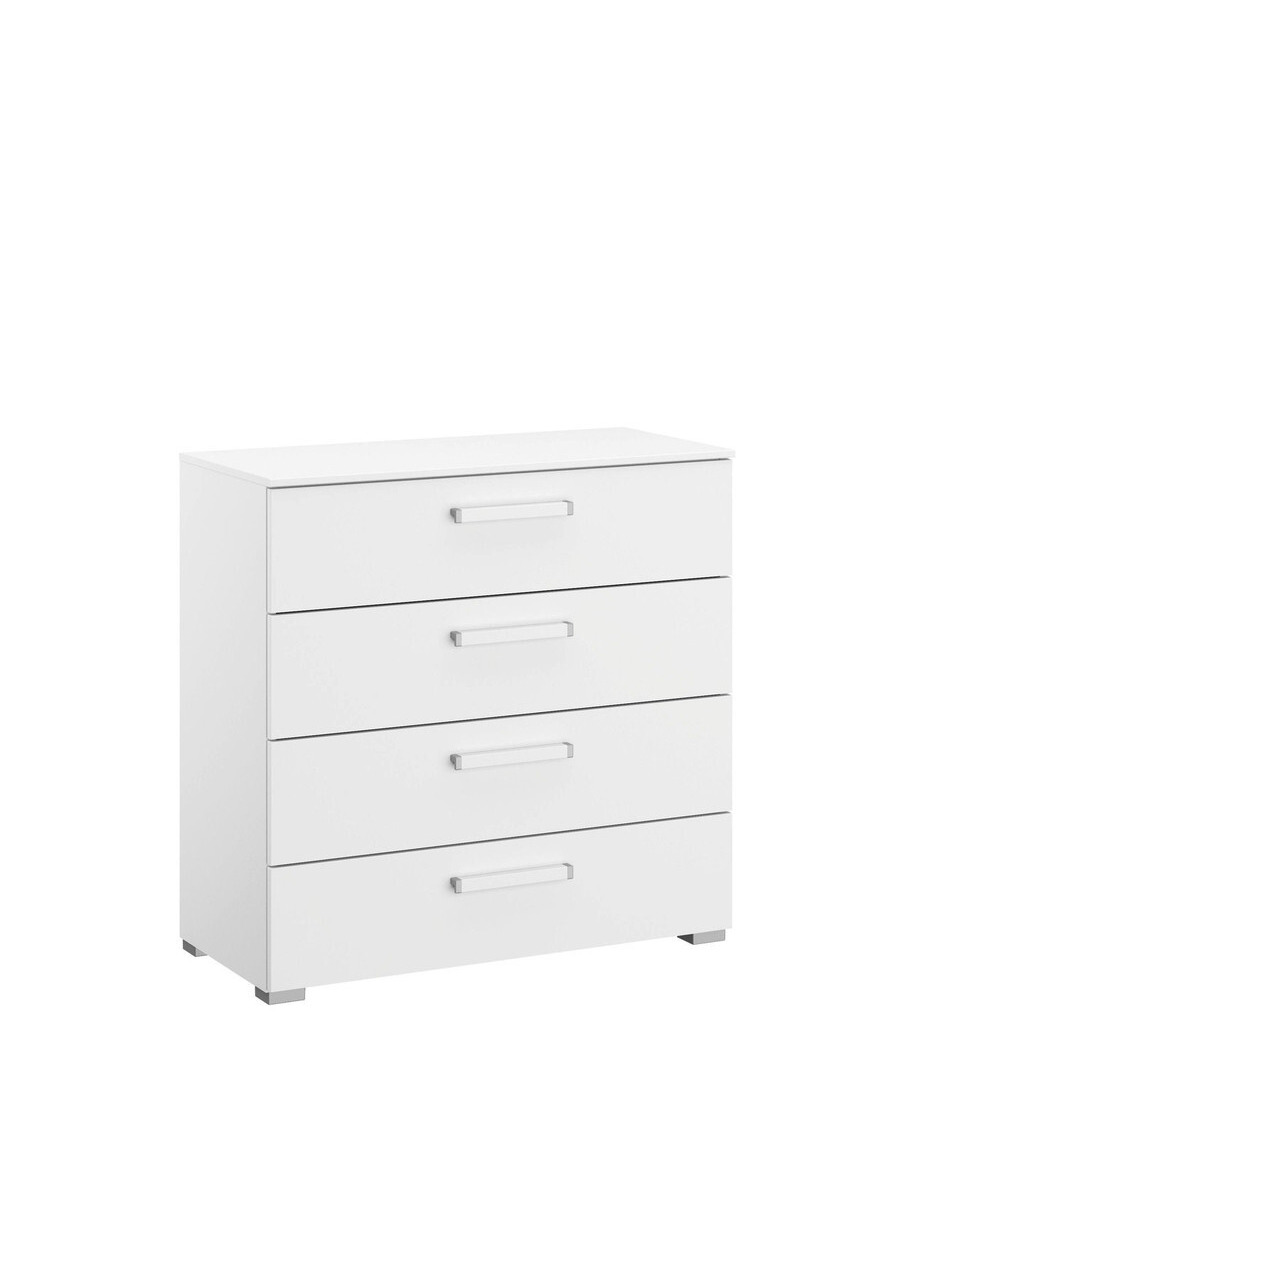 Lazio 4 Drawer Wide Chest of Drawers - image 1